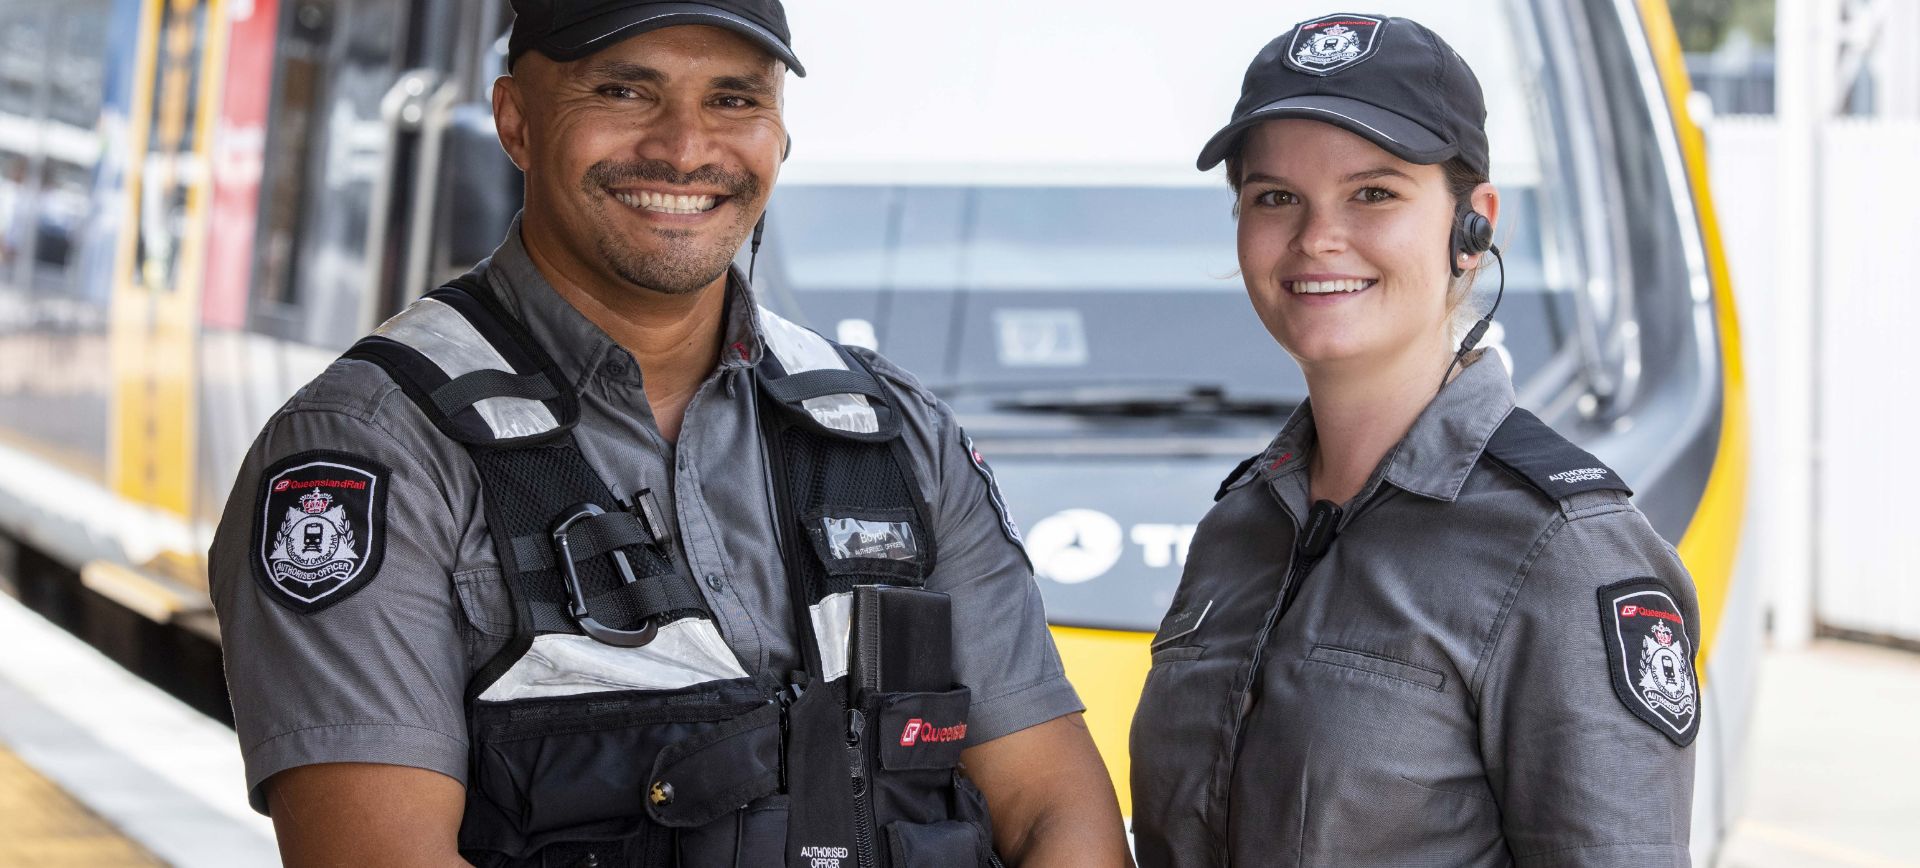 Two Authorised Officers standing in front of a train